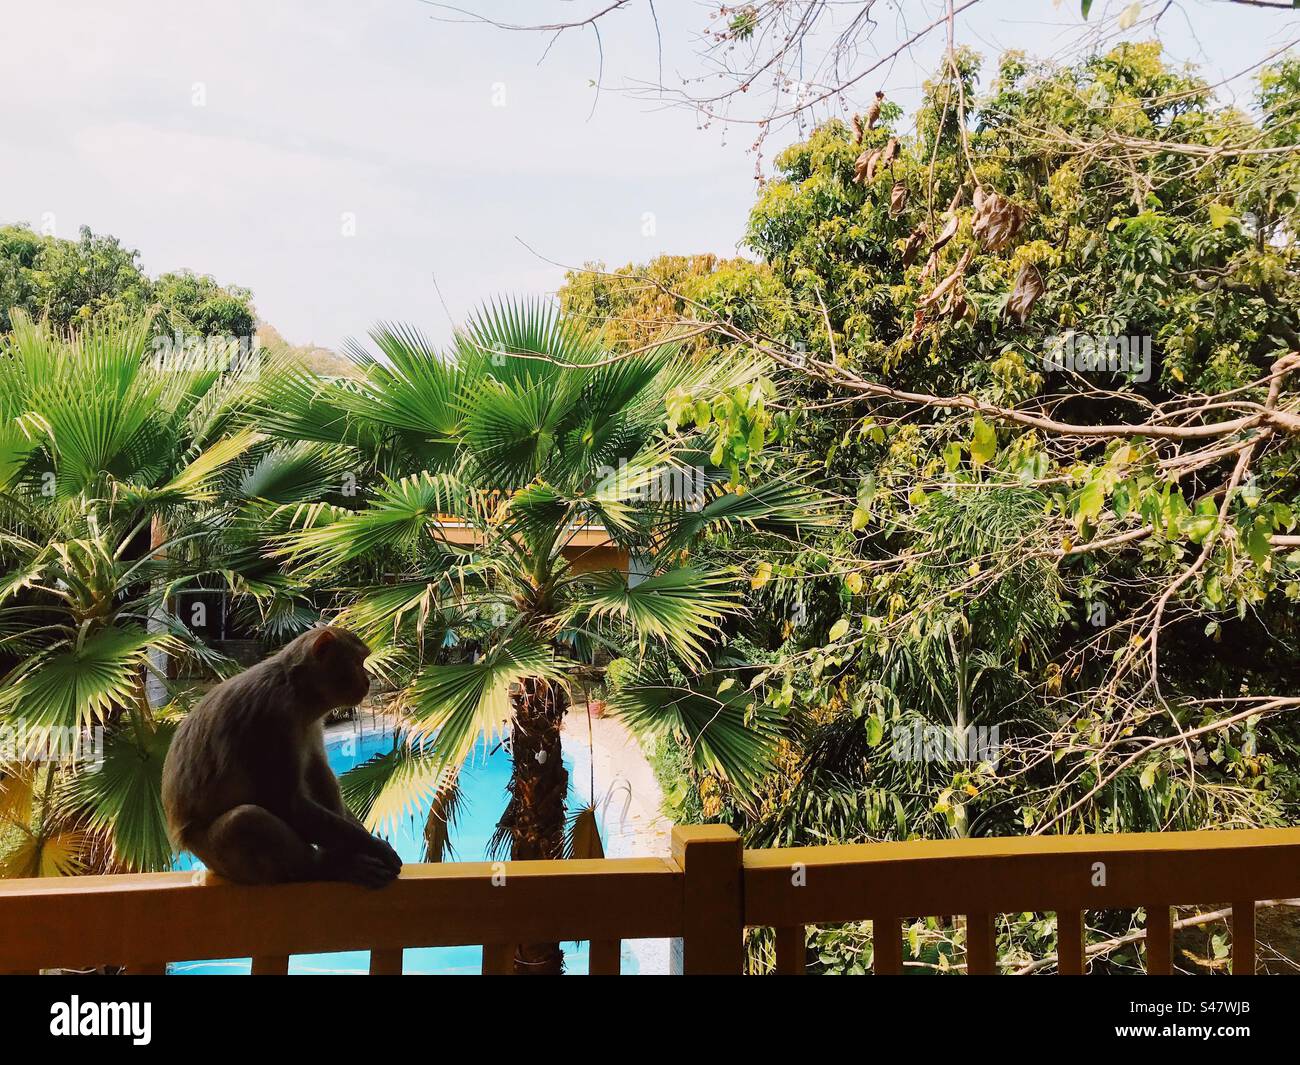 A monkey sitting on the fence over a swimming pool Stock Photo